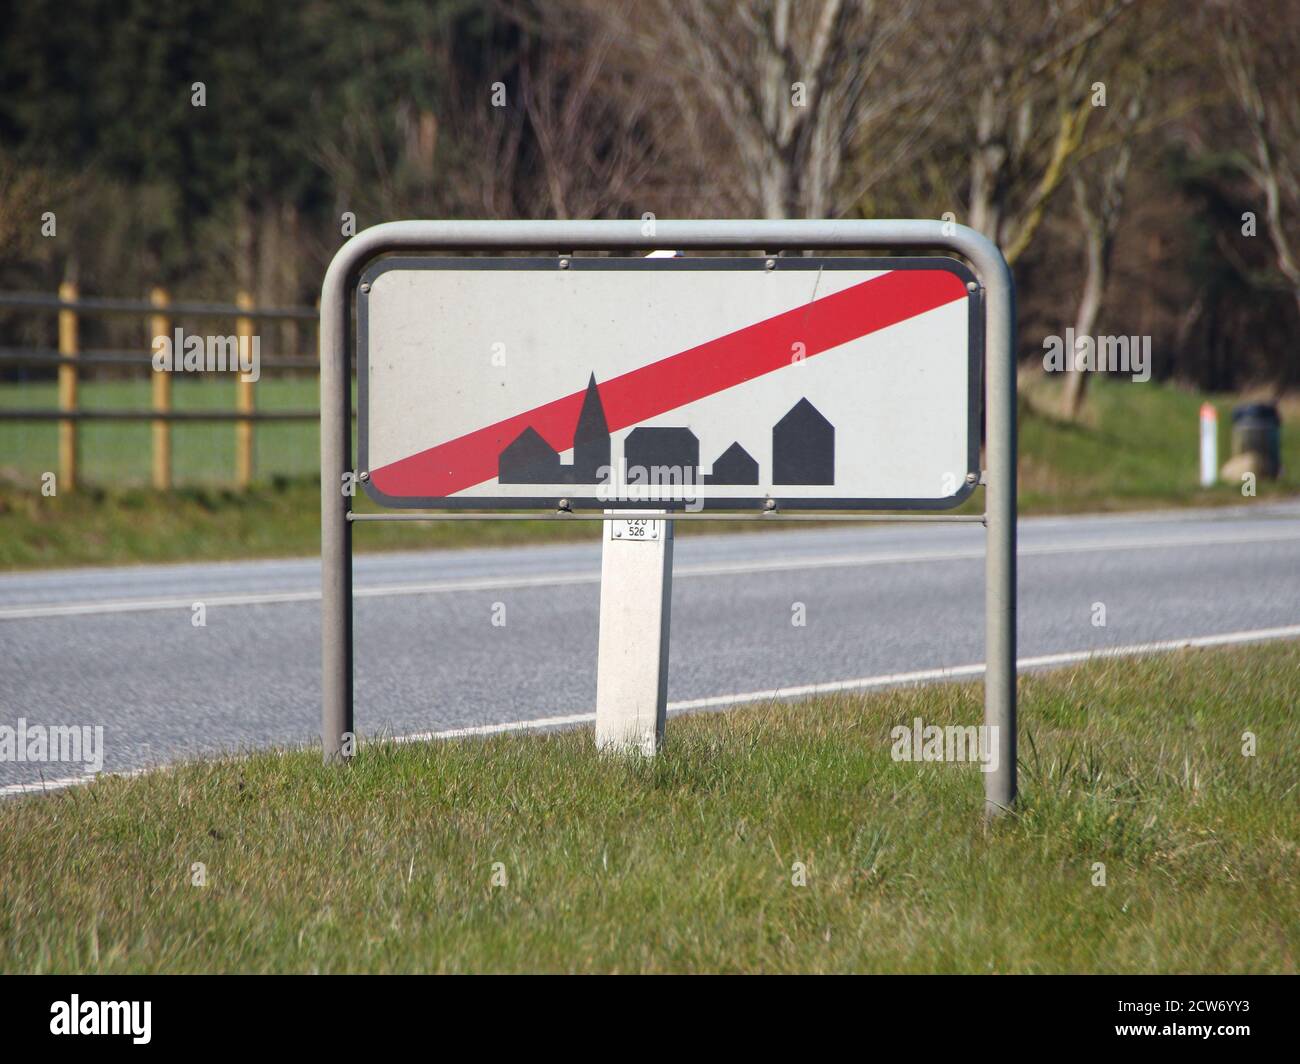 A traffic sign signifying leaving town. Trees are in the background and the sign stands on grass. Stock Photo